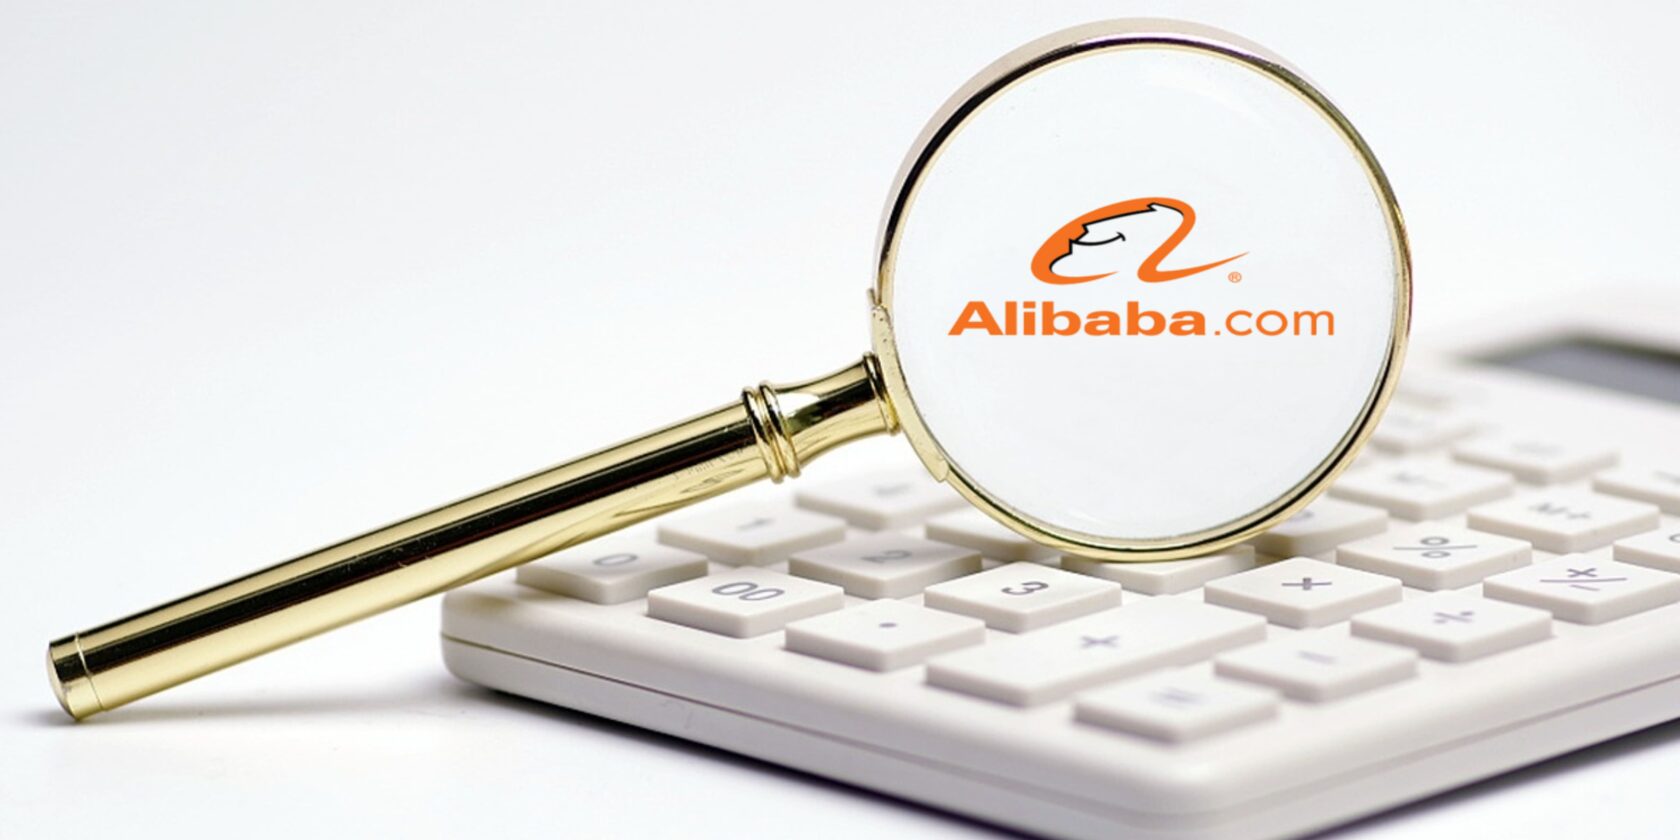 calculator and  magnifying glass with Alibaba logo on it